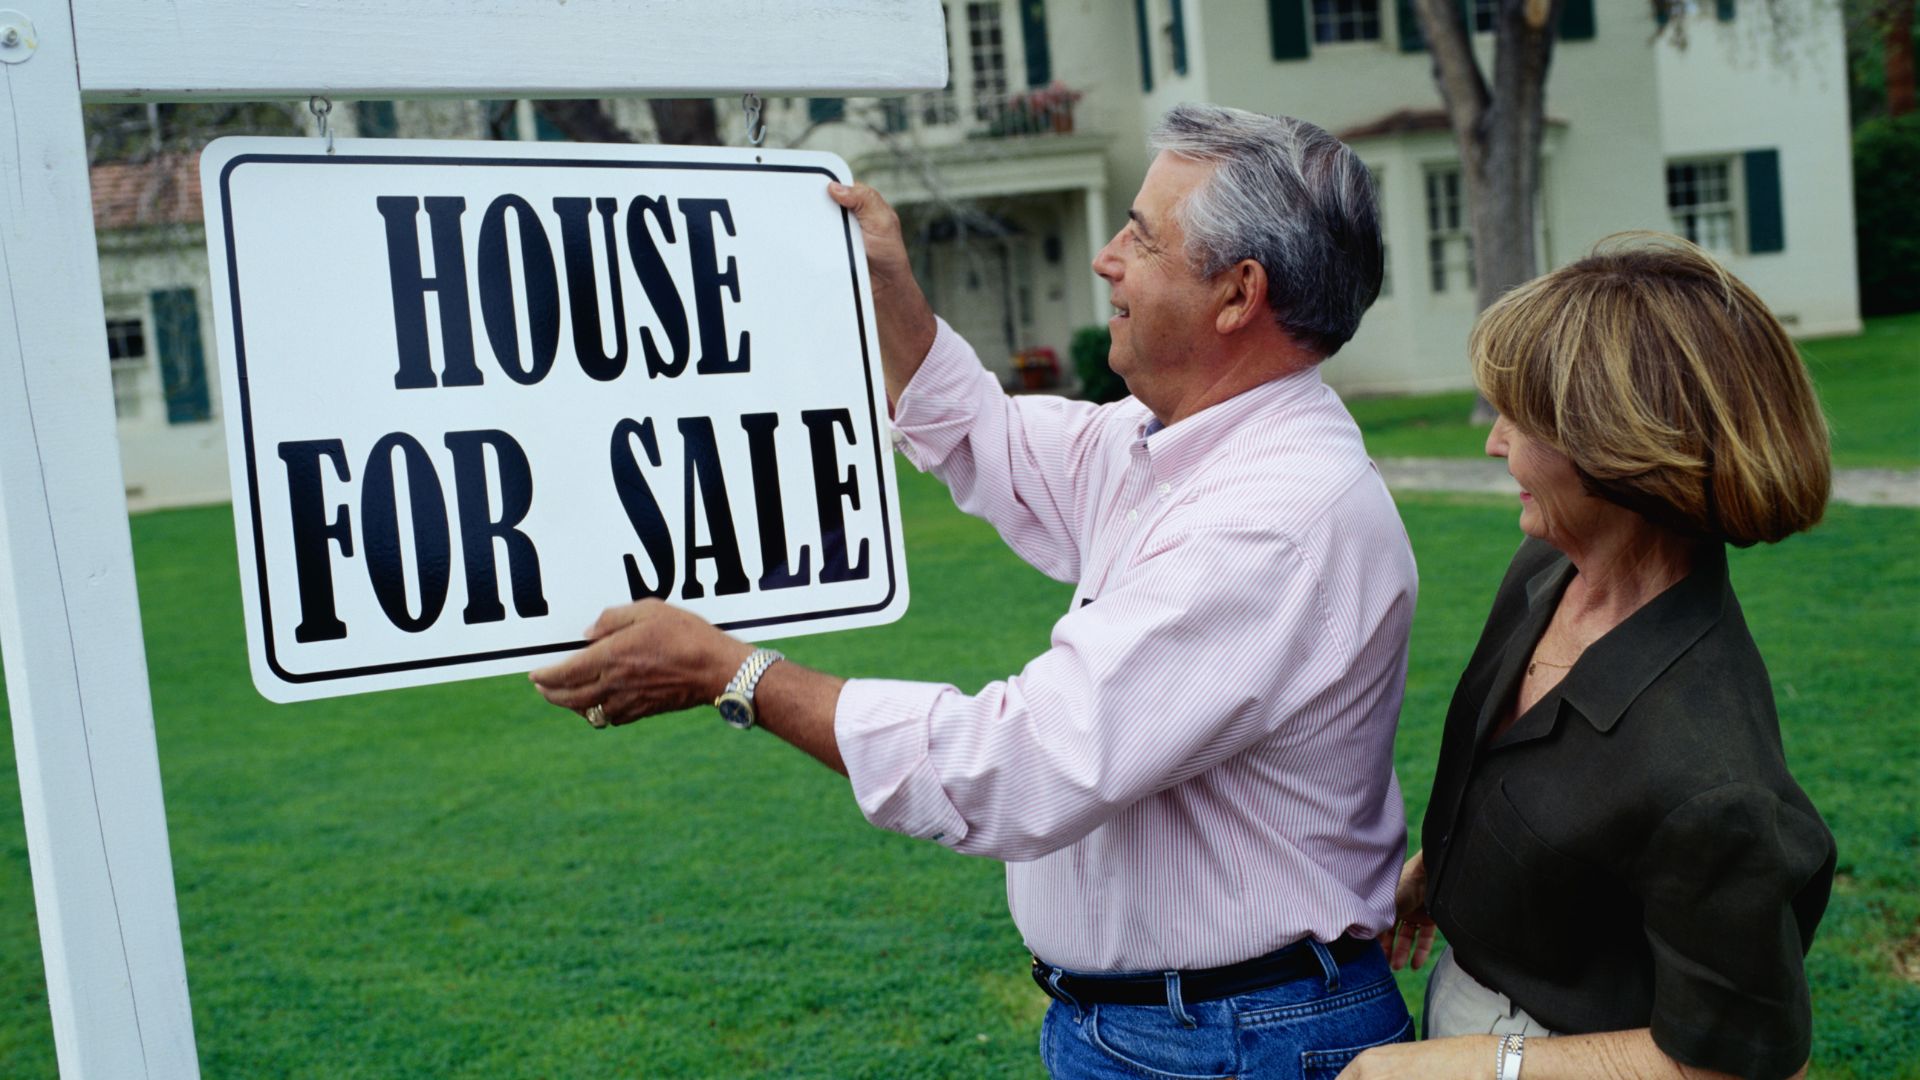 An elderly couple putting up a "House for sale" sign in front of their house